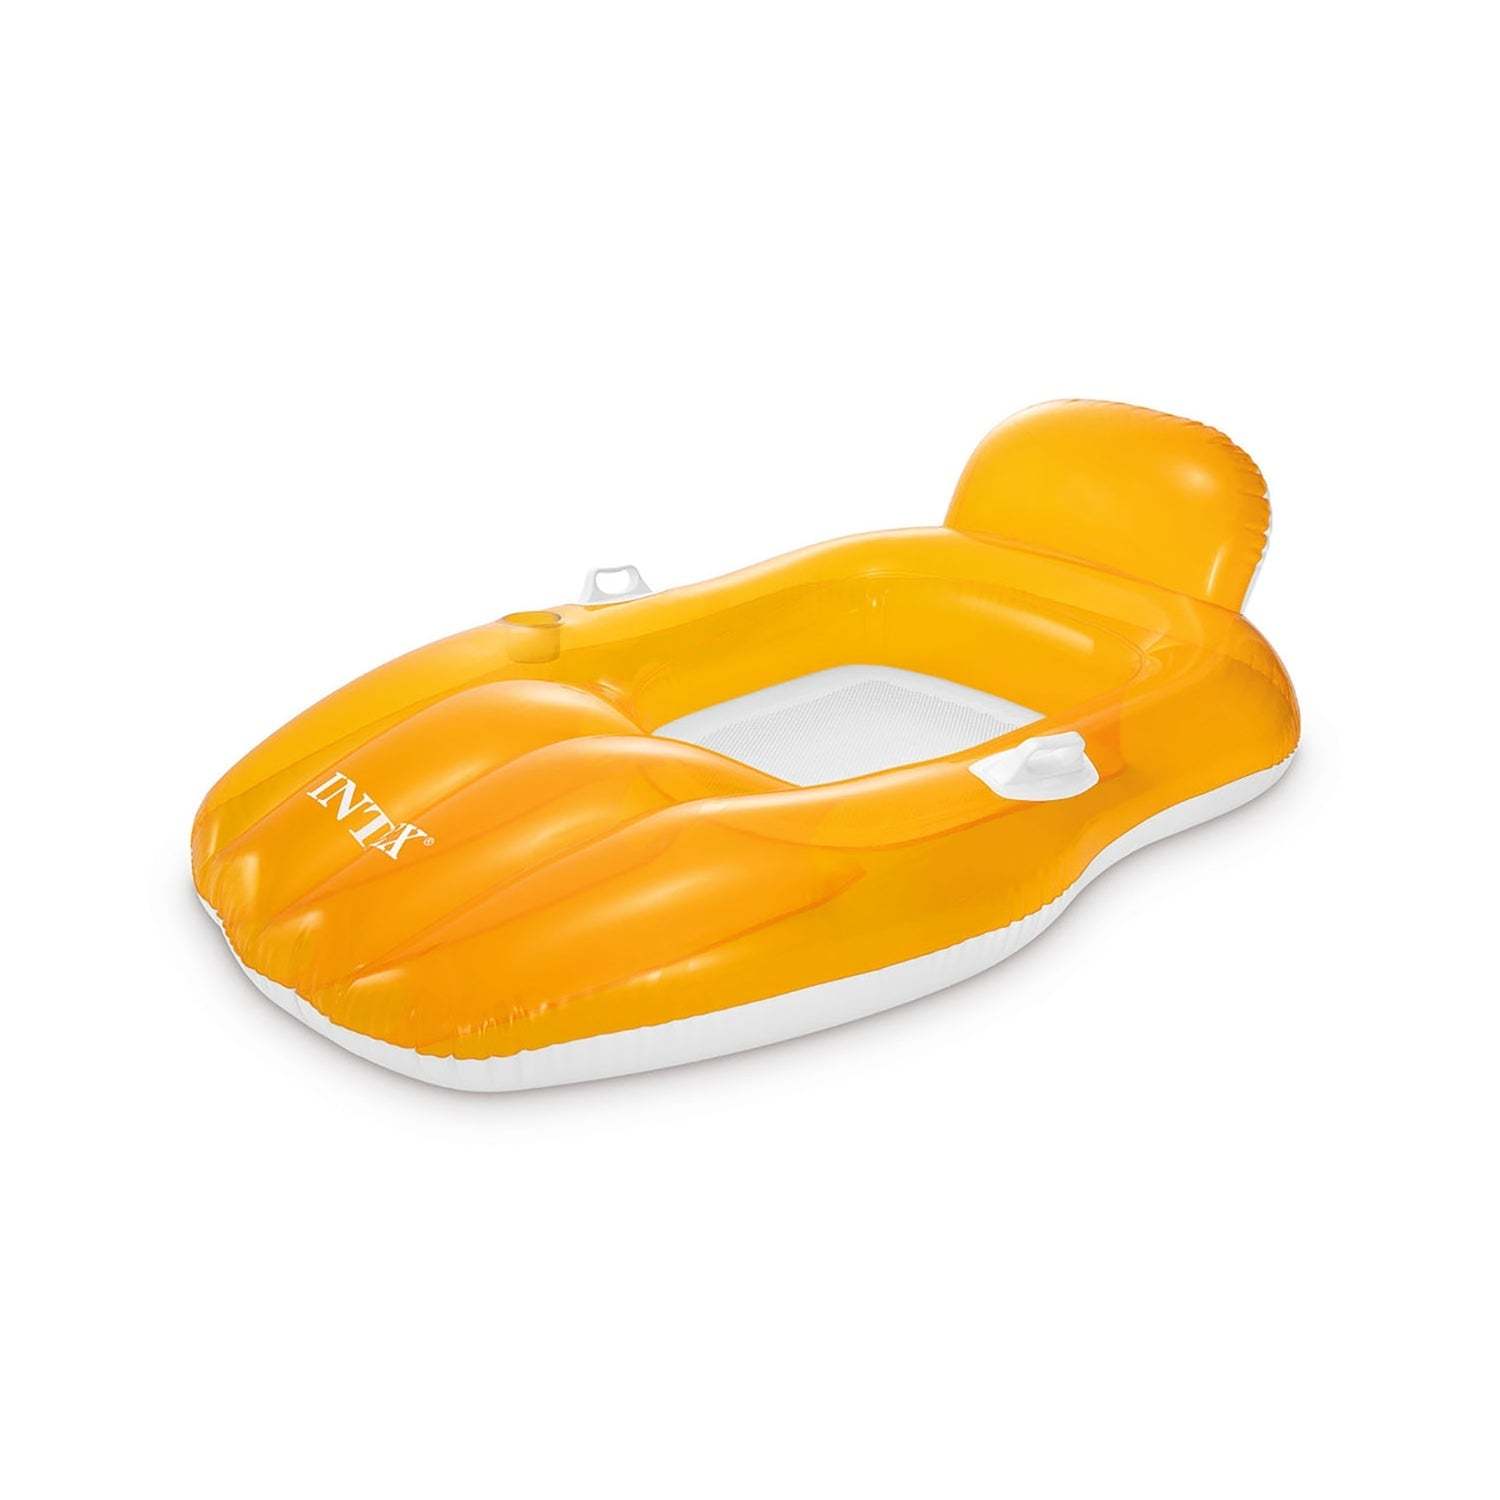 Intex - Inflatable Pool Chair, 64'' x 41'', Integrated Cup Holder, Orange - $36.97